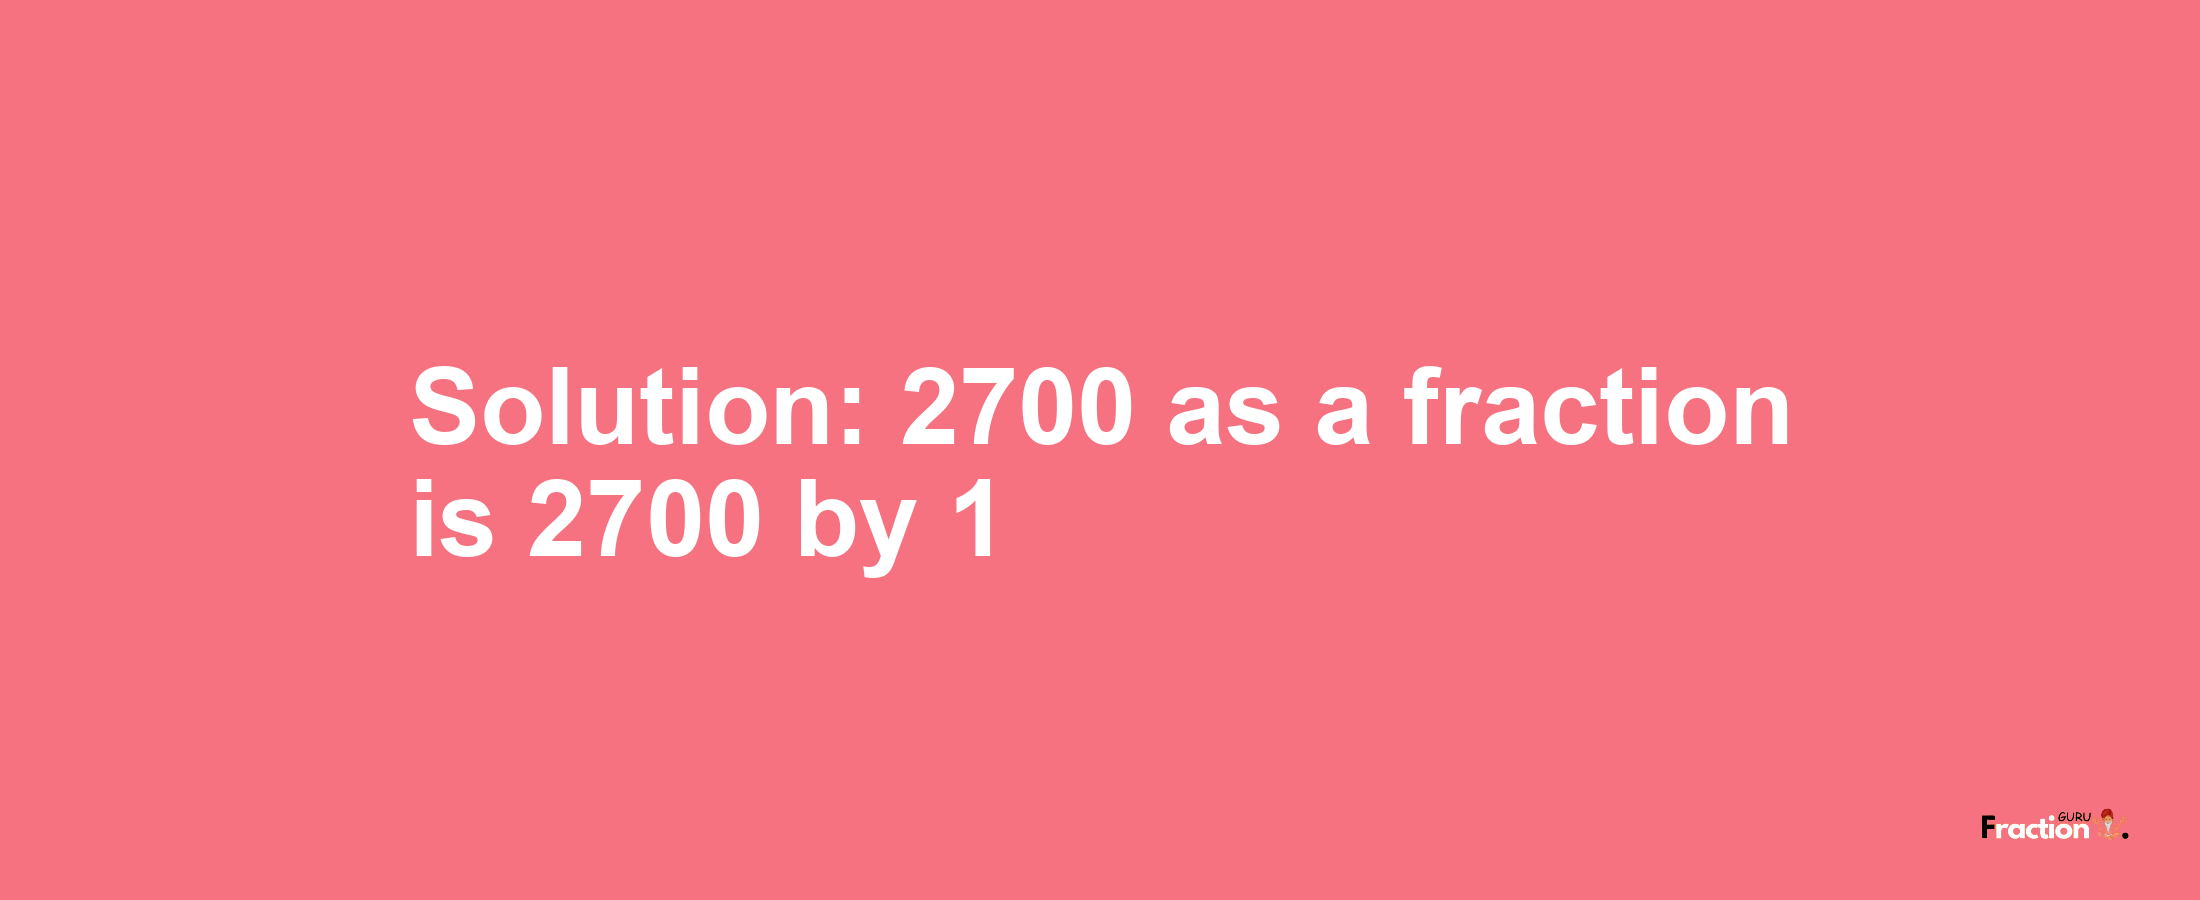 Solution:2700 as a fraction is 2700/1